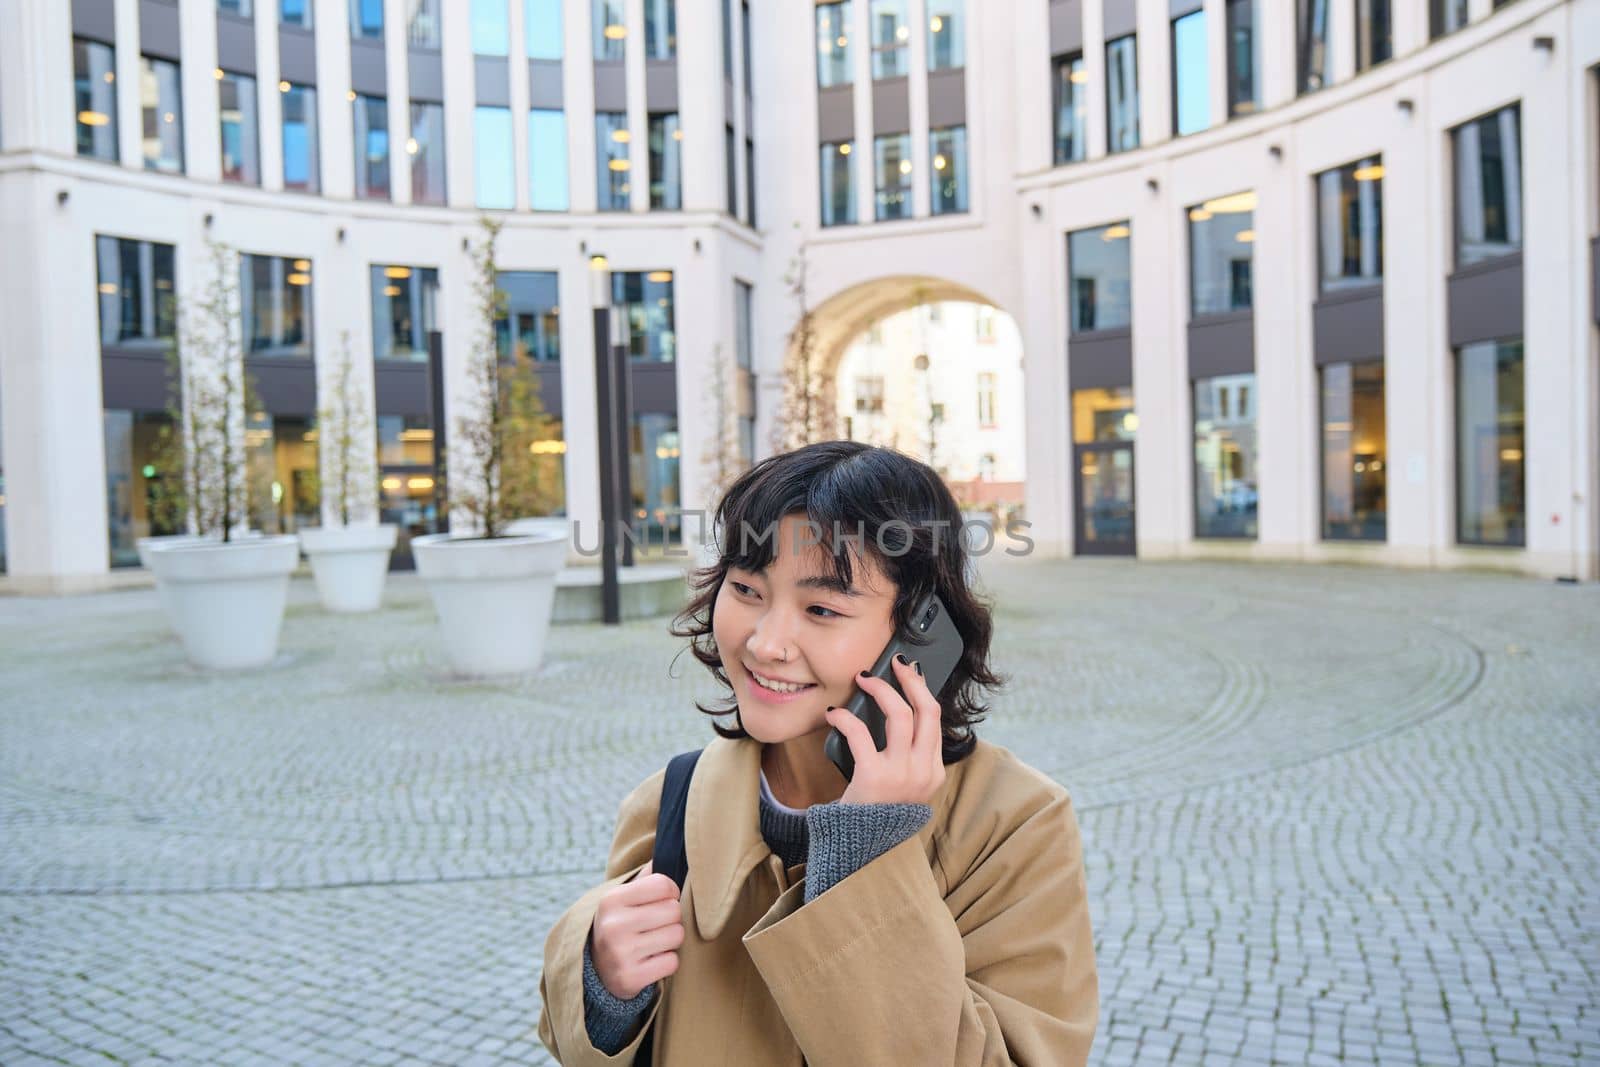 Cellular technology. Young korean woman talks on mobile phone, makes a phone call on her way home, walks down street, city centre, has telephone conversation.